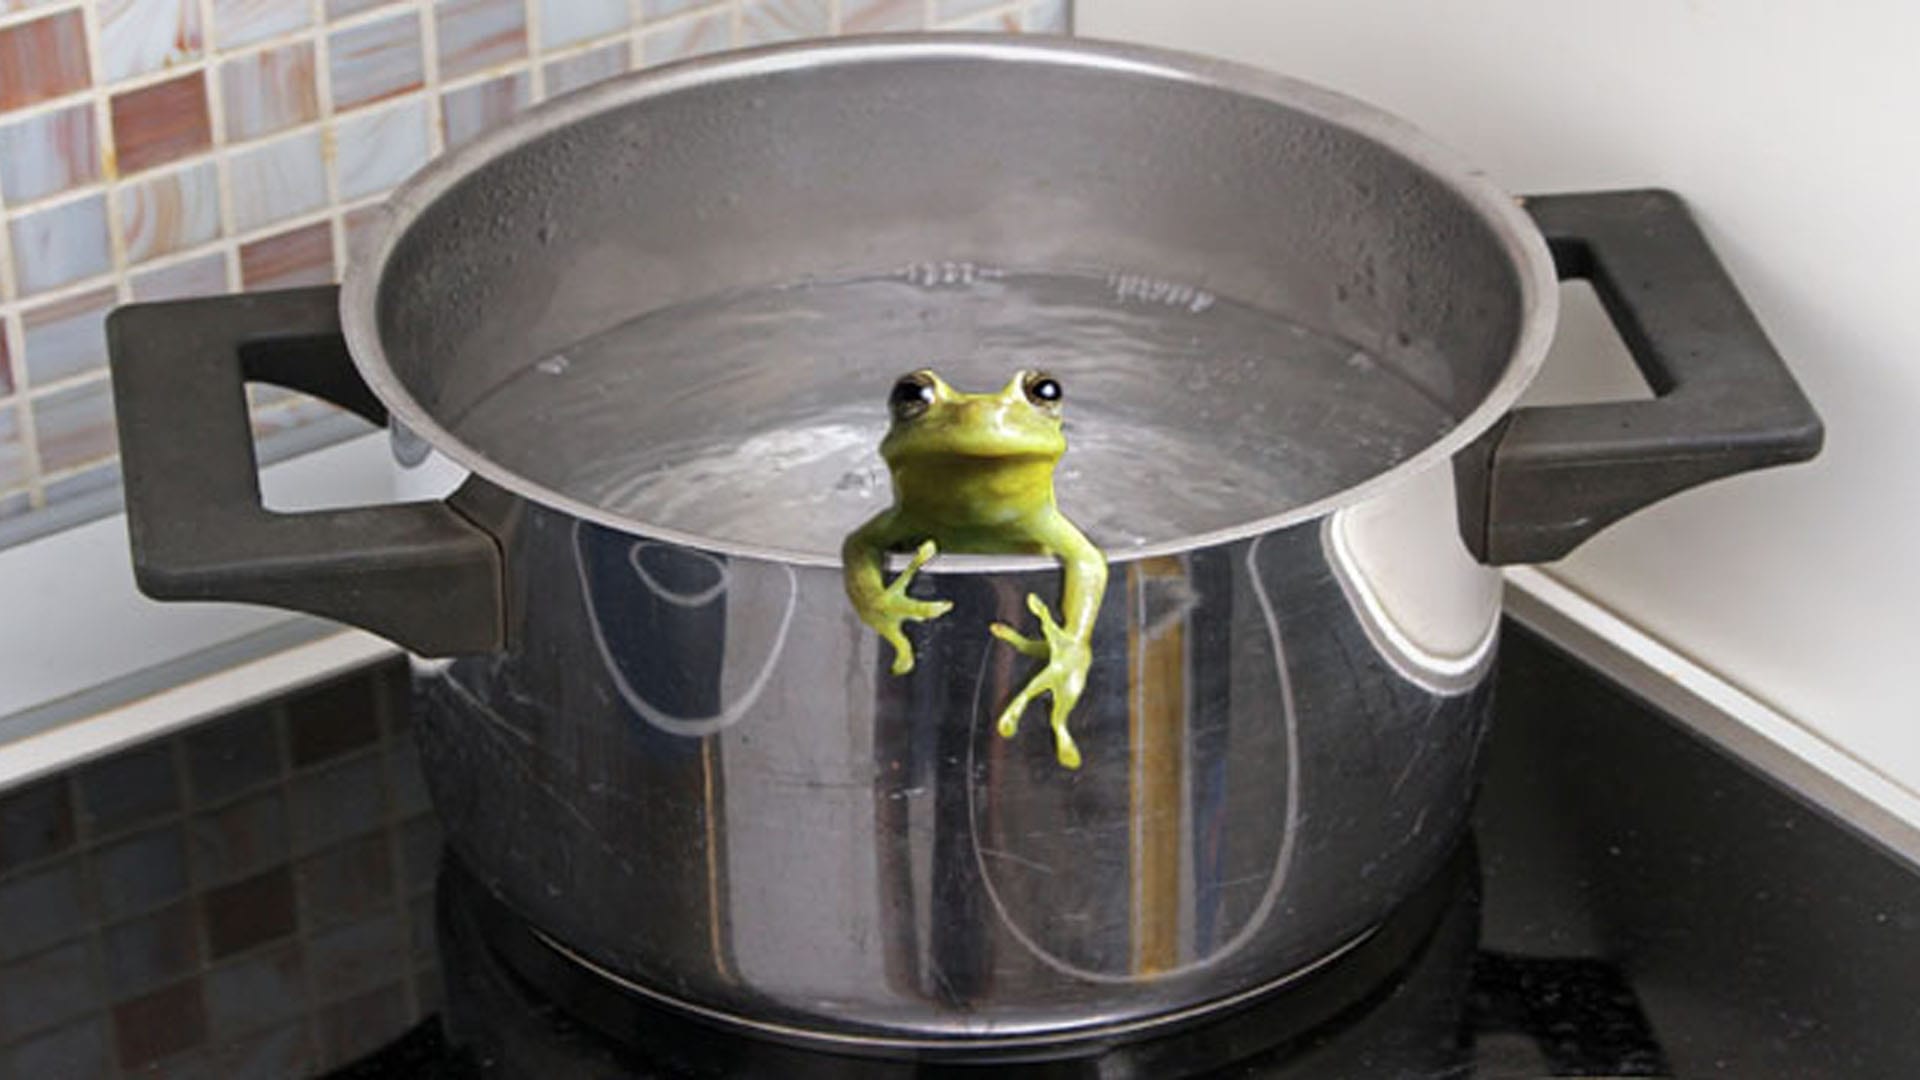 a small green frog hanging out of a pot on a stove